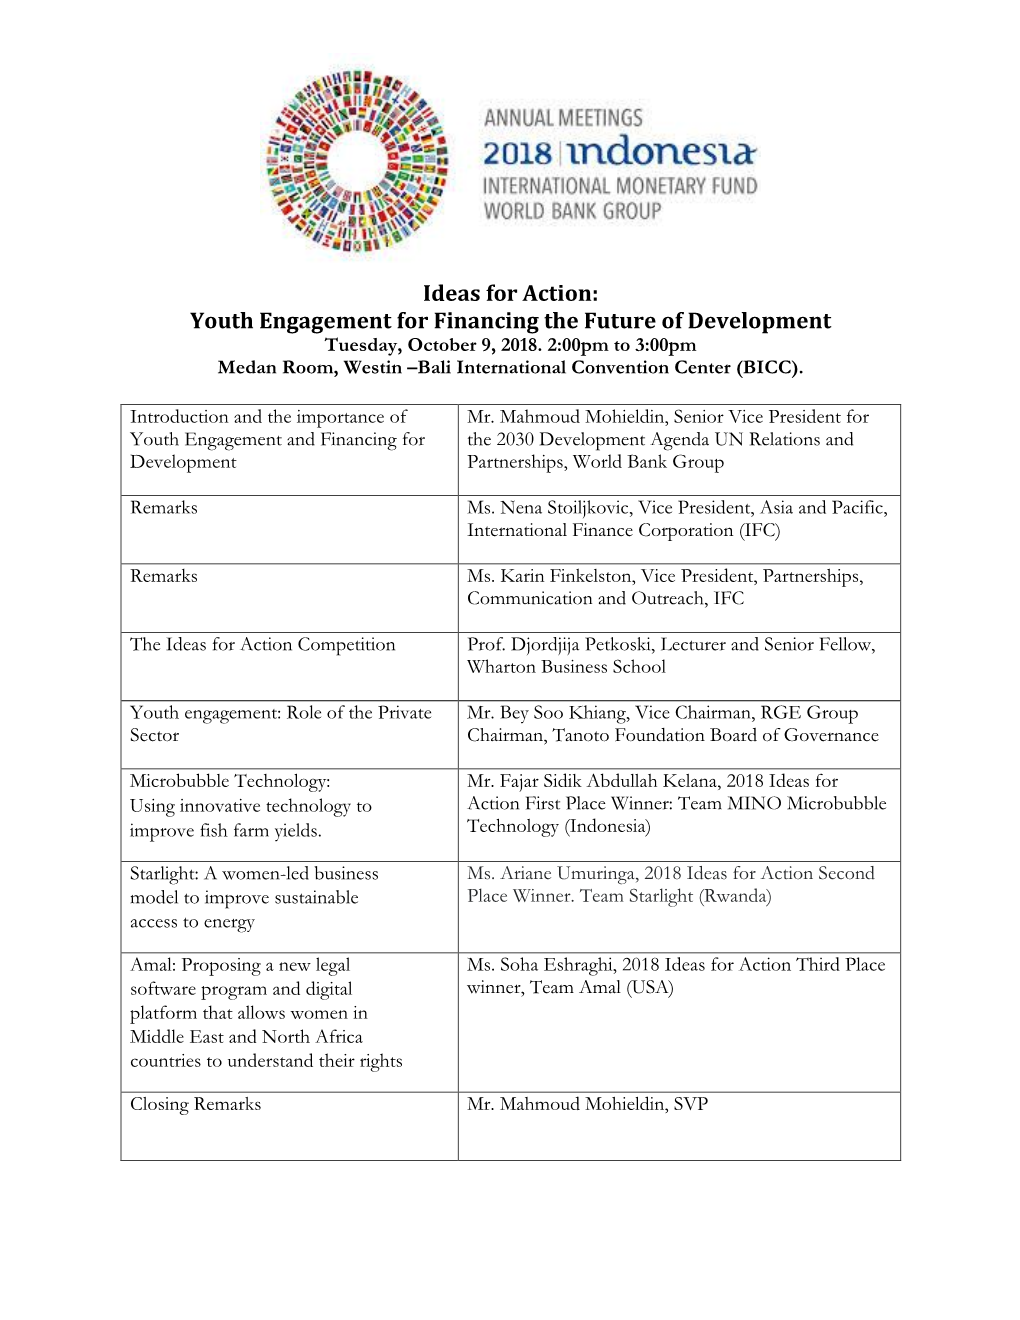 Ideas for Action: Youth Engagement for Financing the Future of Development Tuesday, October 9, 2018